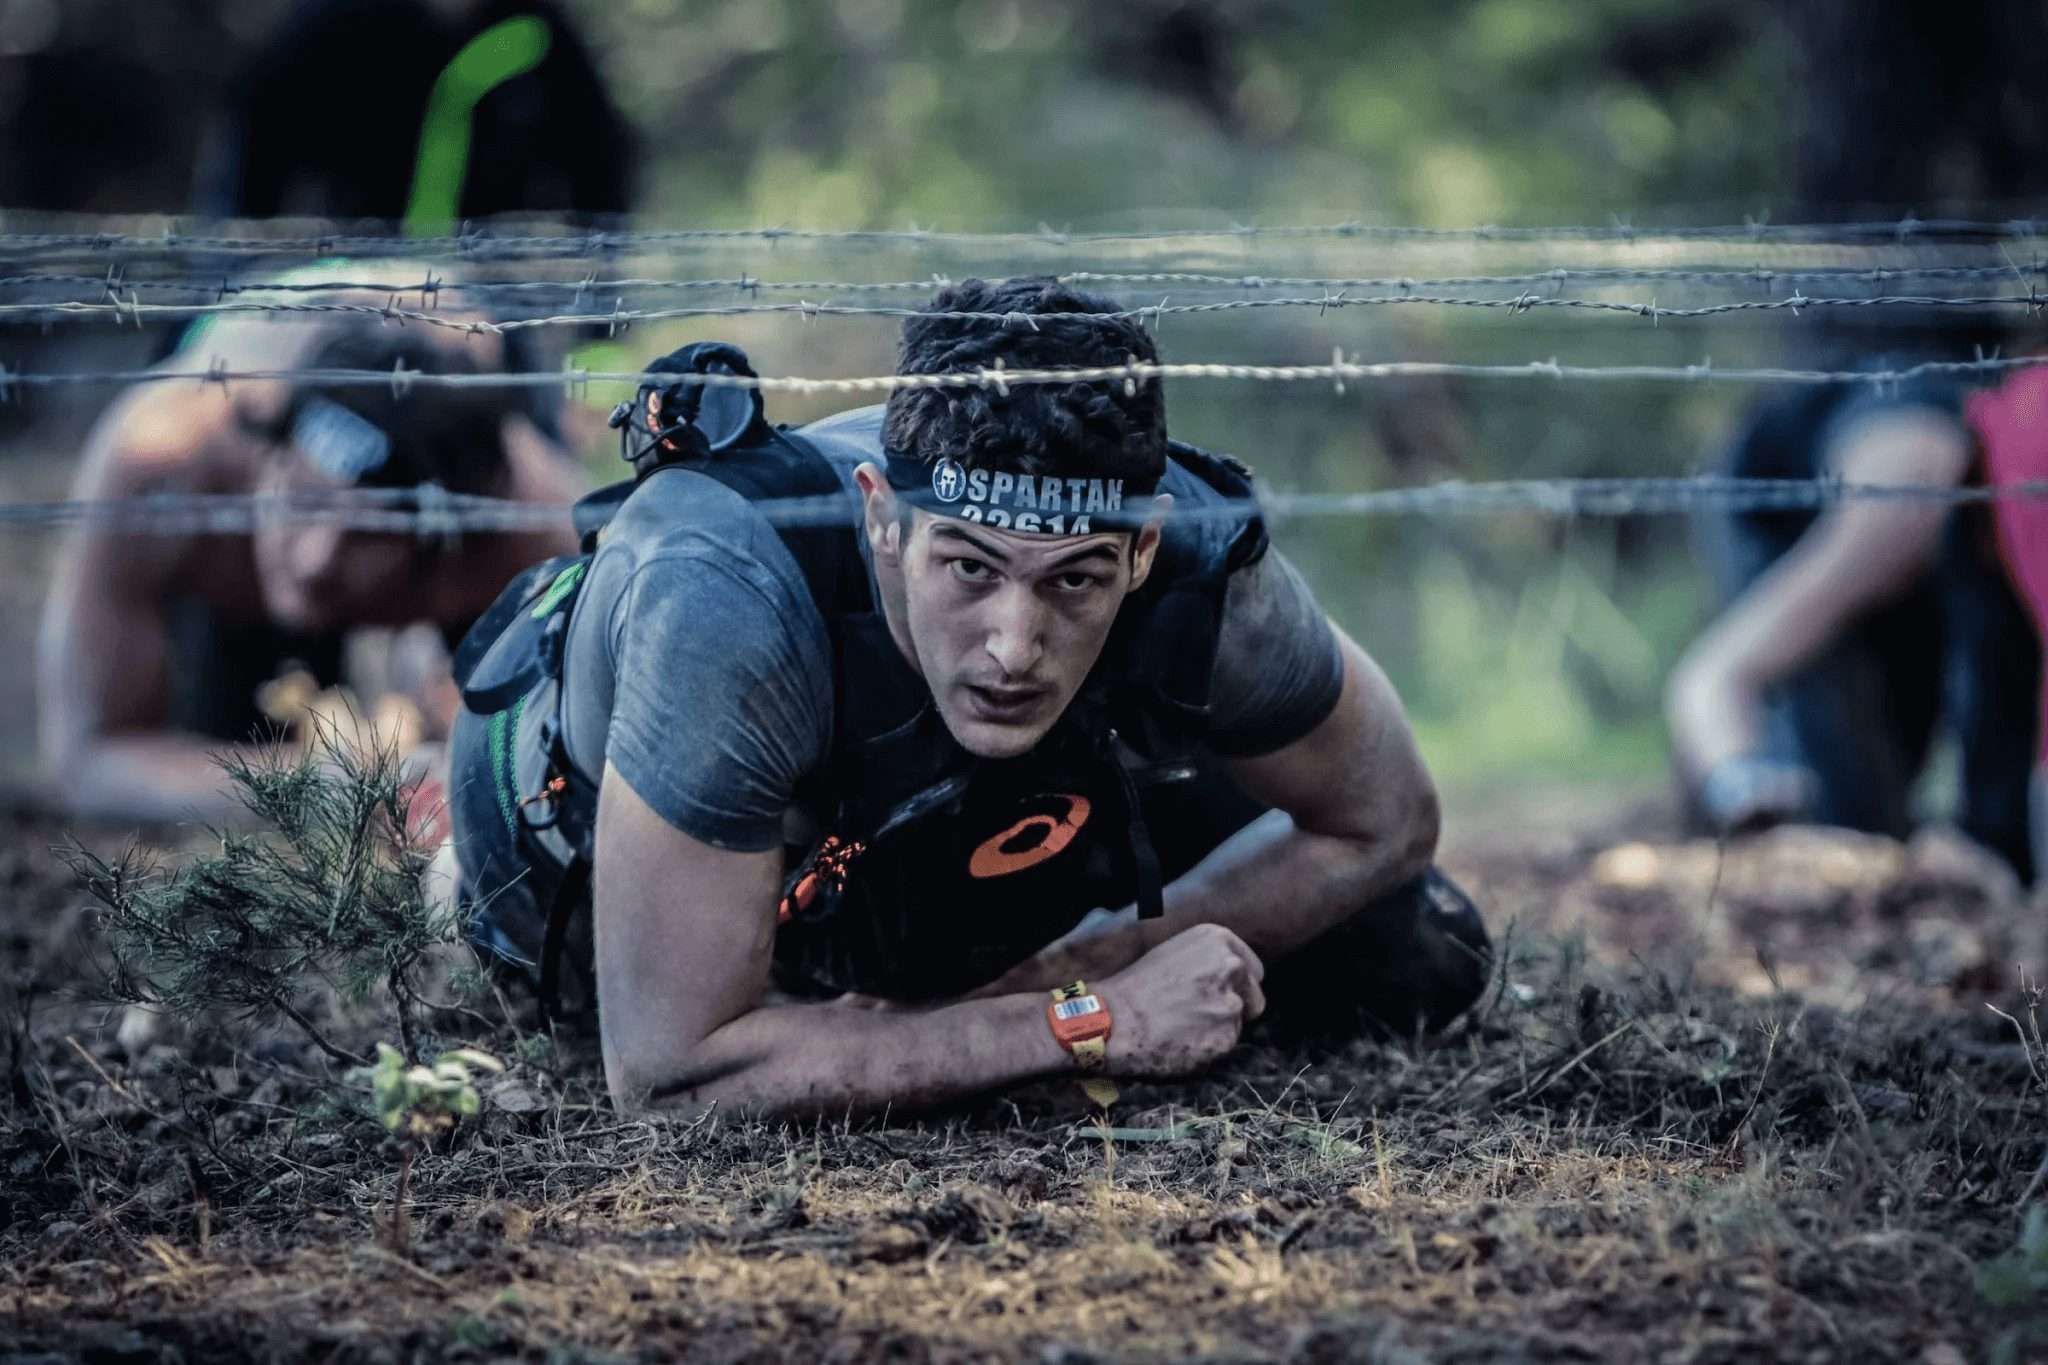 Man crawling under barbed wire in the Spartan Race